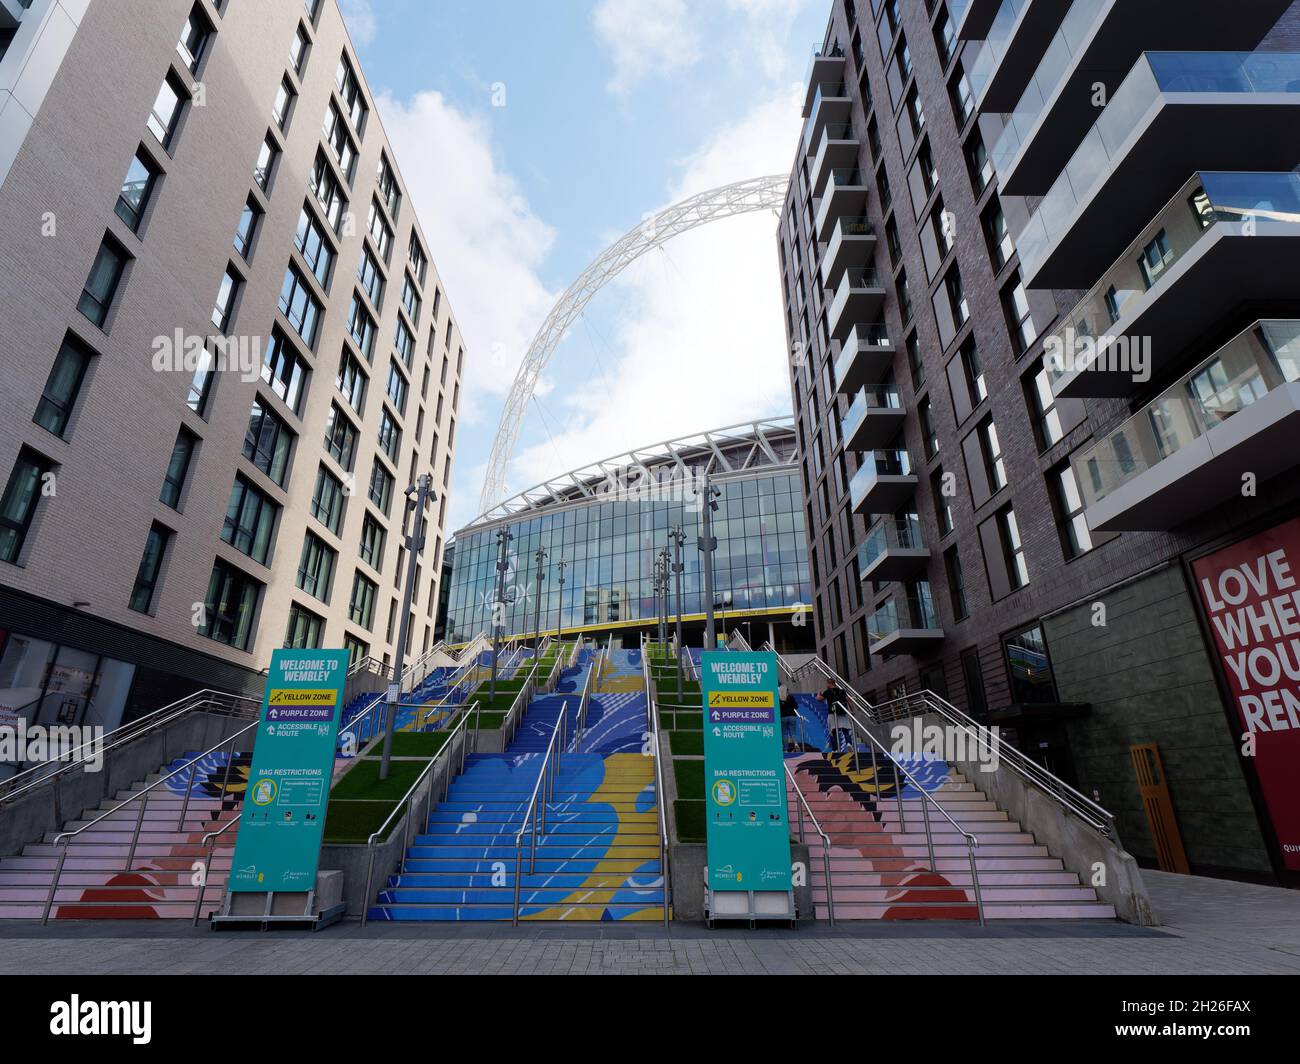 Wembley, Greater London, England, October 12 2021: Multi coloured stairs leading to Wembley Stadium, a football stadium for the national English team. Stock Photo